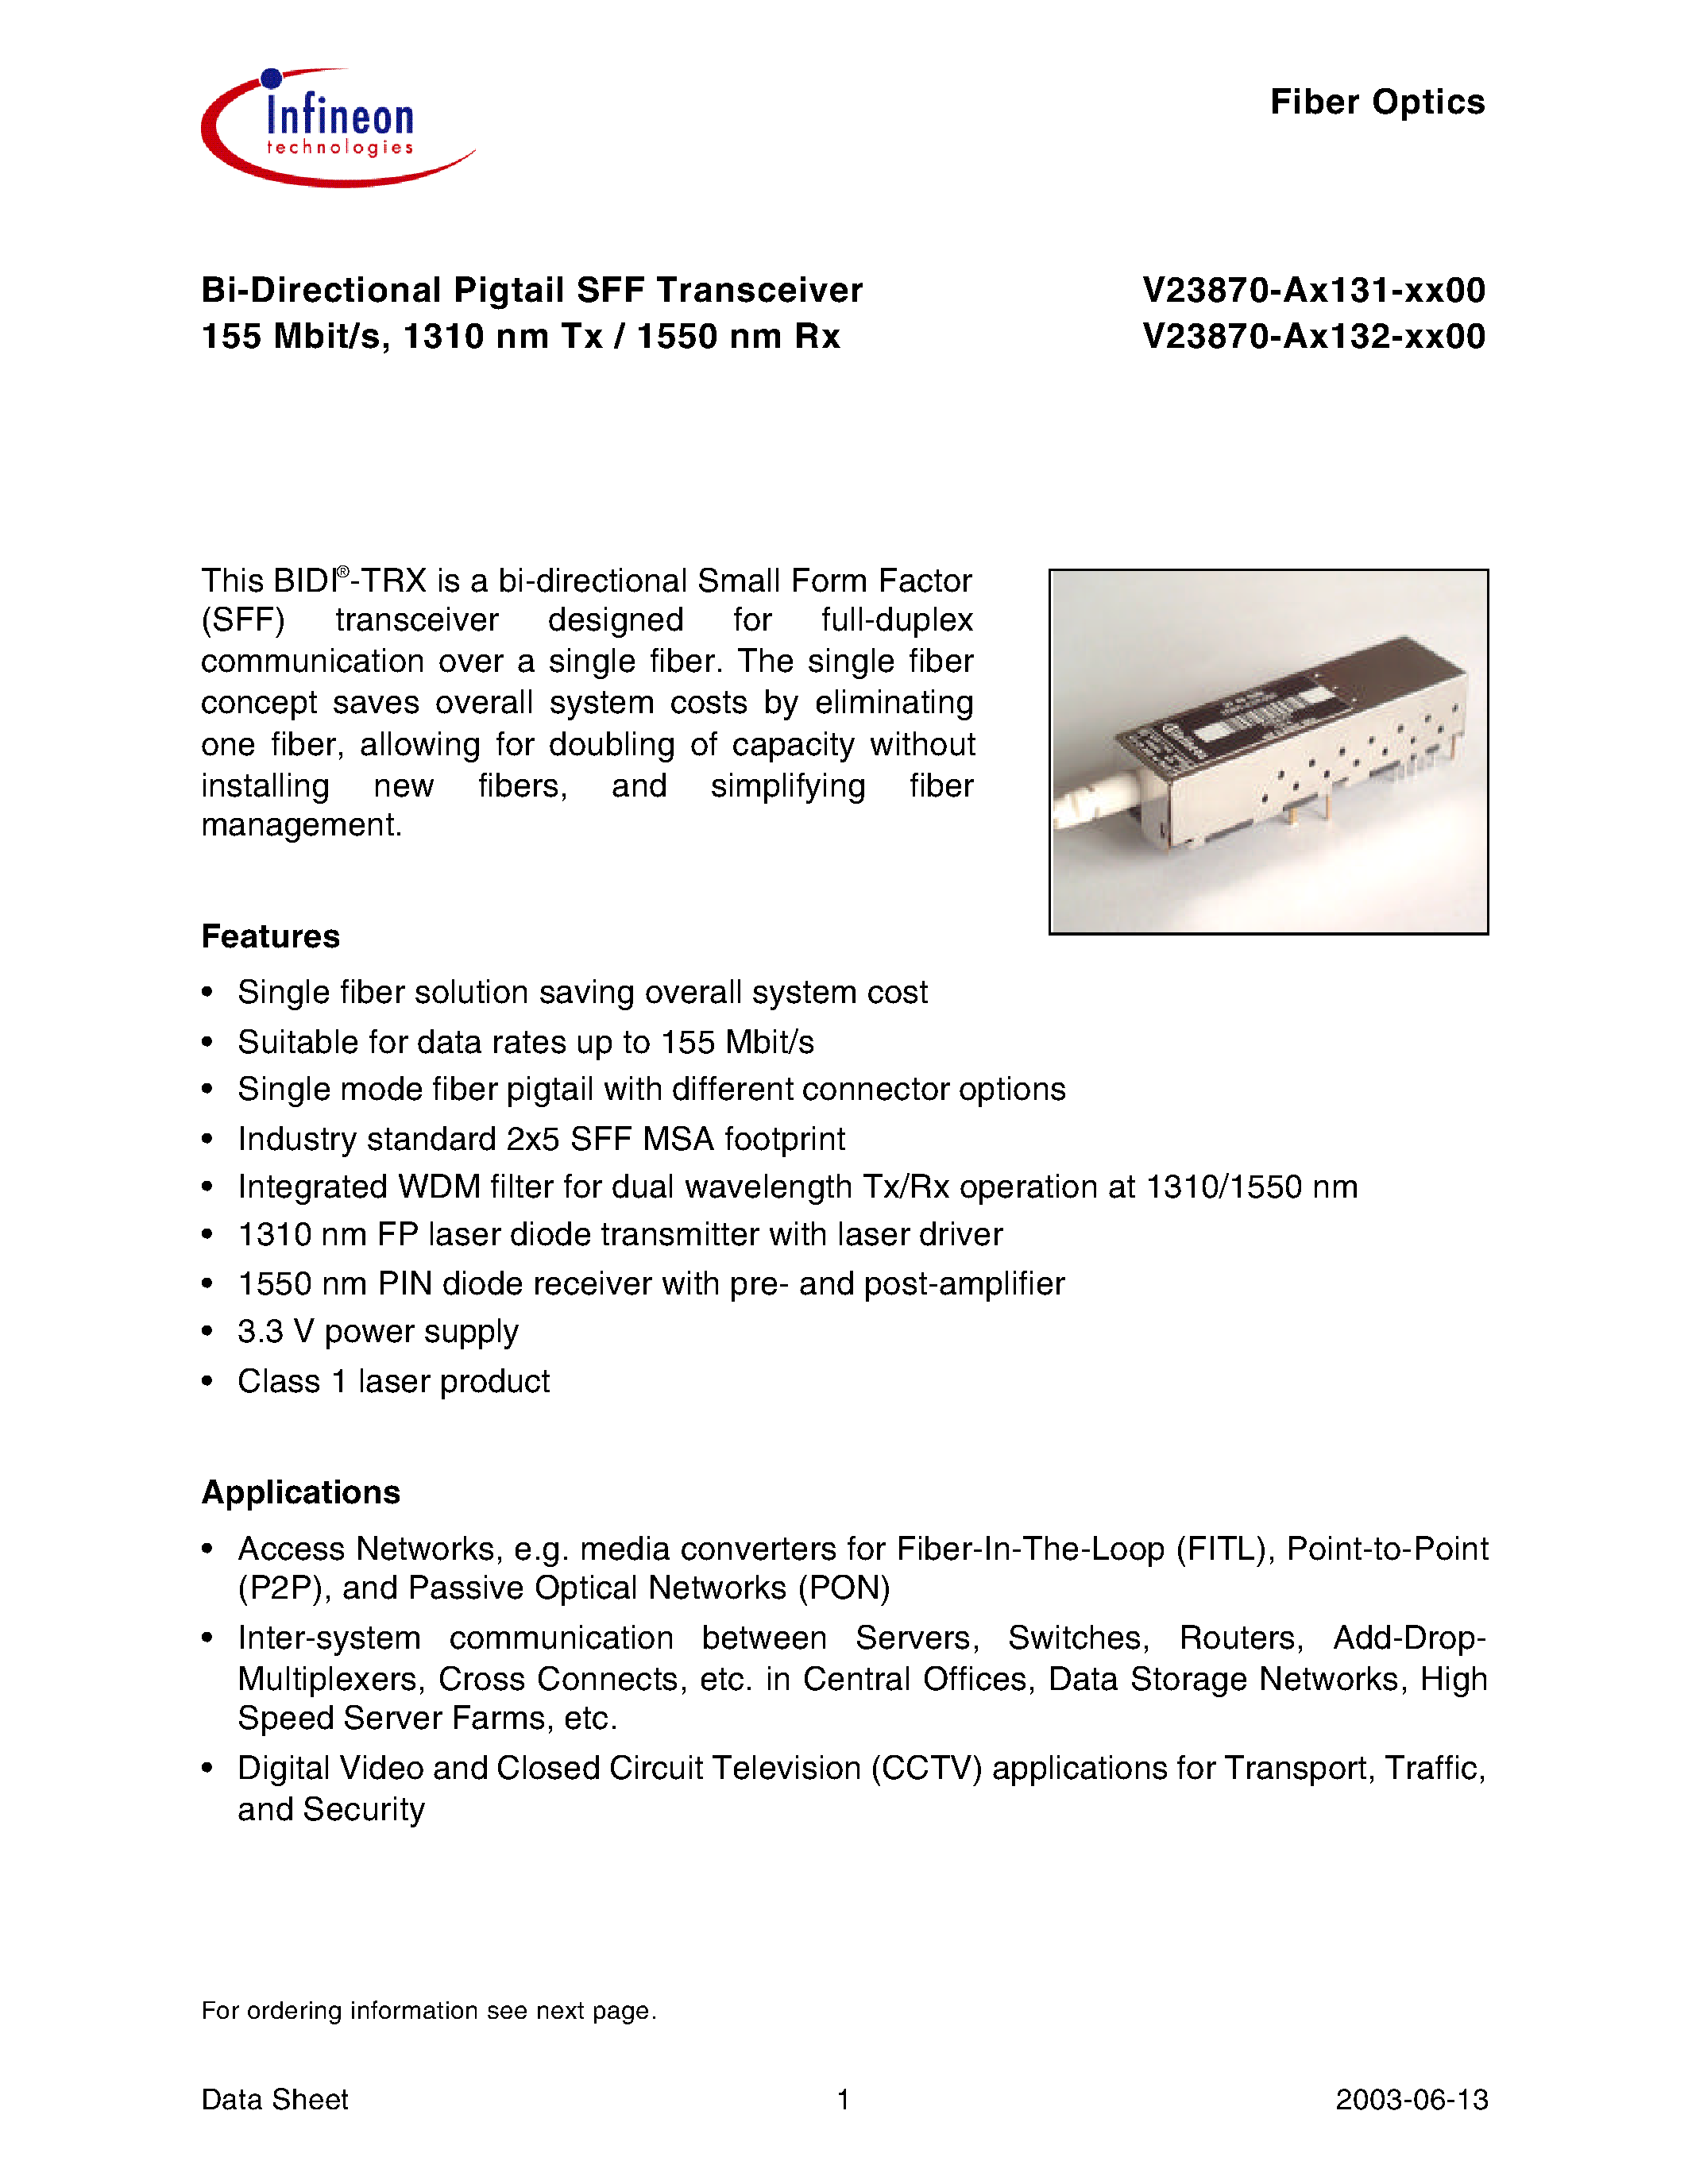 Datasheet V23870-A3131-A200 - Bi-Directional Pigtail SFF Transceiver 155 Mbit/s/ 1310 nm Tx / 1550 nm Rx page 1